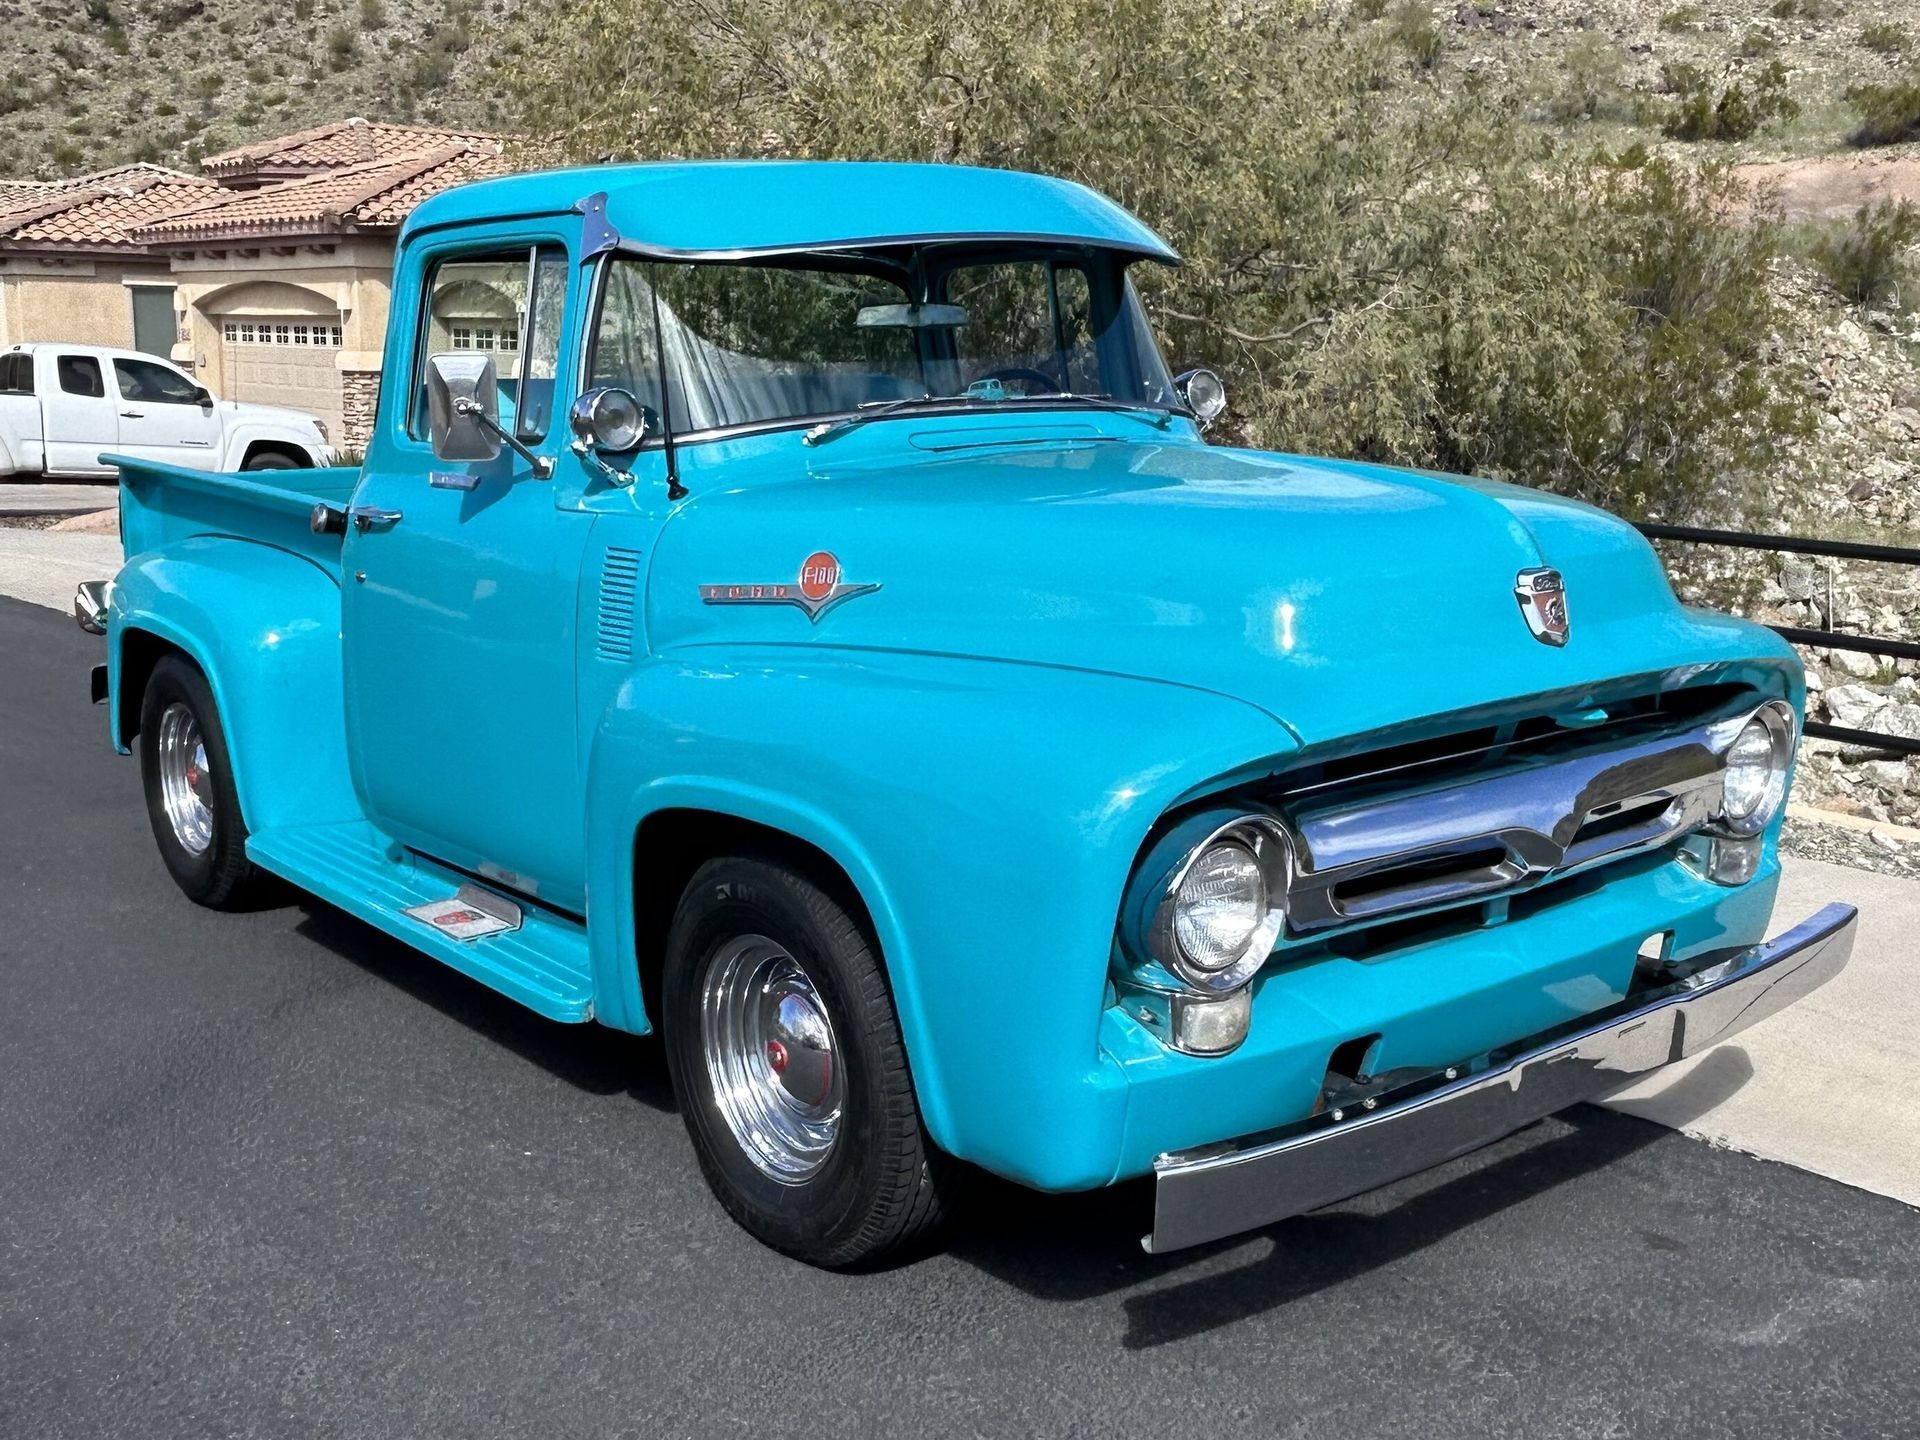 Find of the Day: This Custom 1956 F100 is Built Ford Tough with Chevy V8 Power